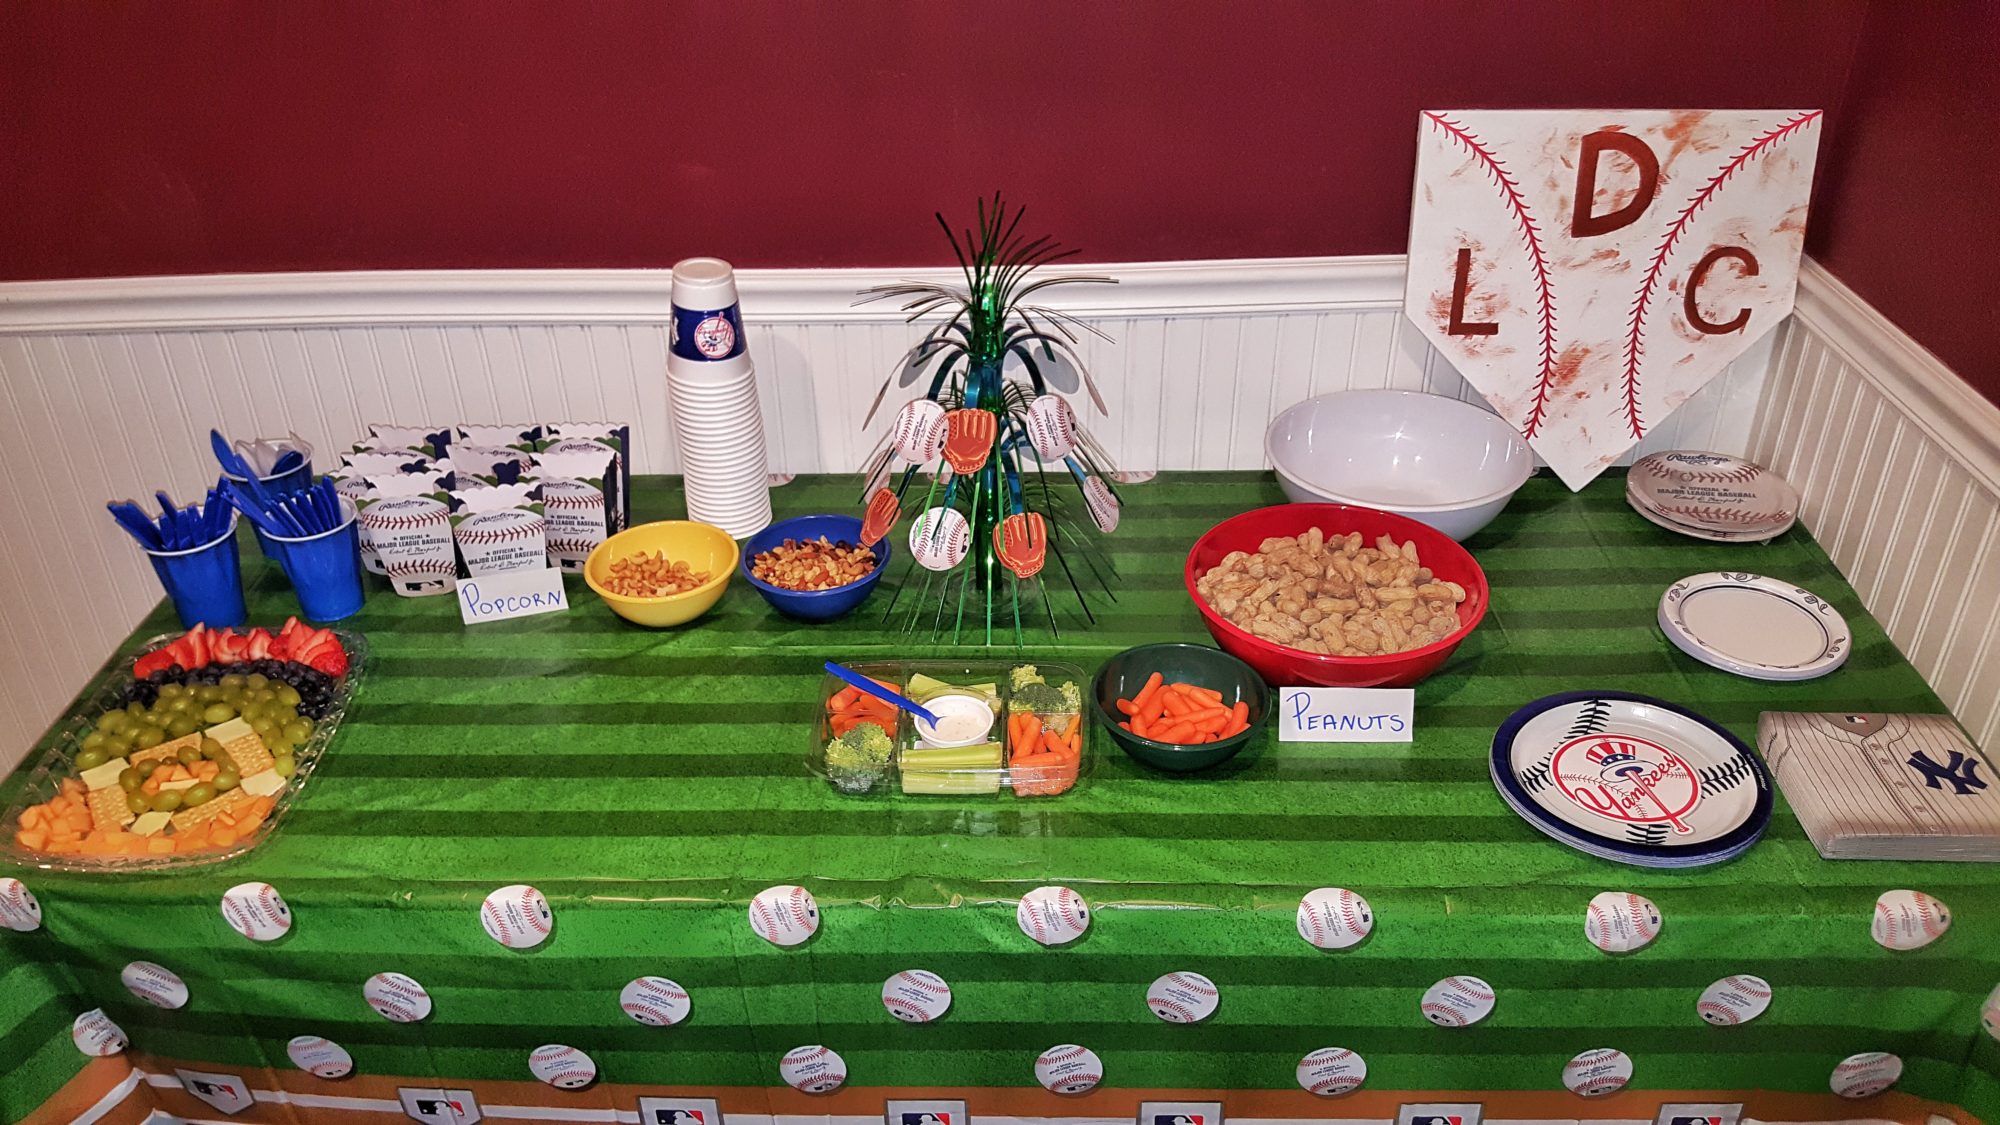 Baseball Themed Party – Inspiration for Your Next Party | Califf Life ...